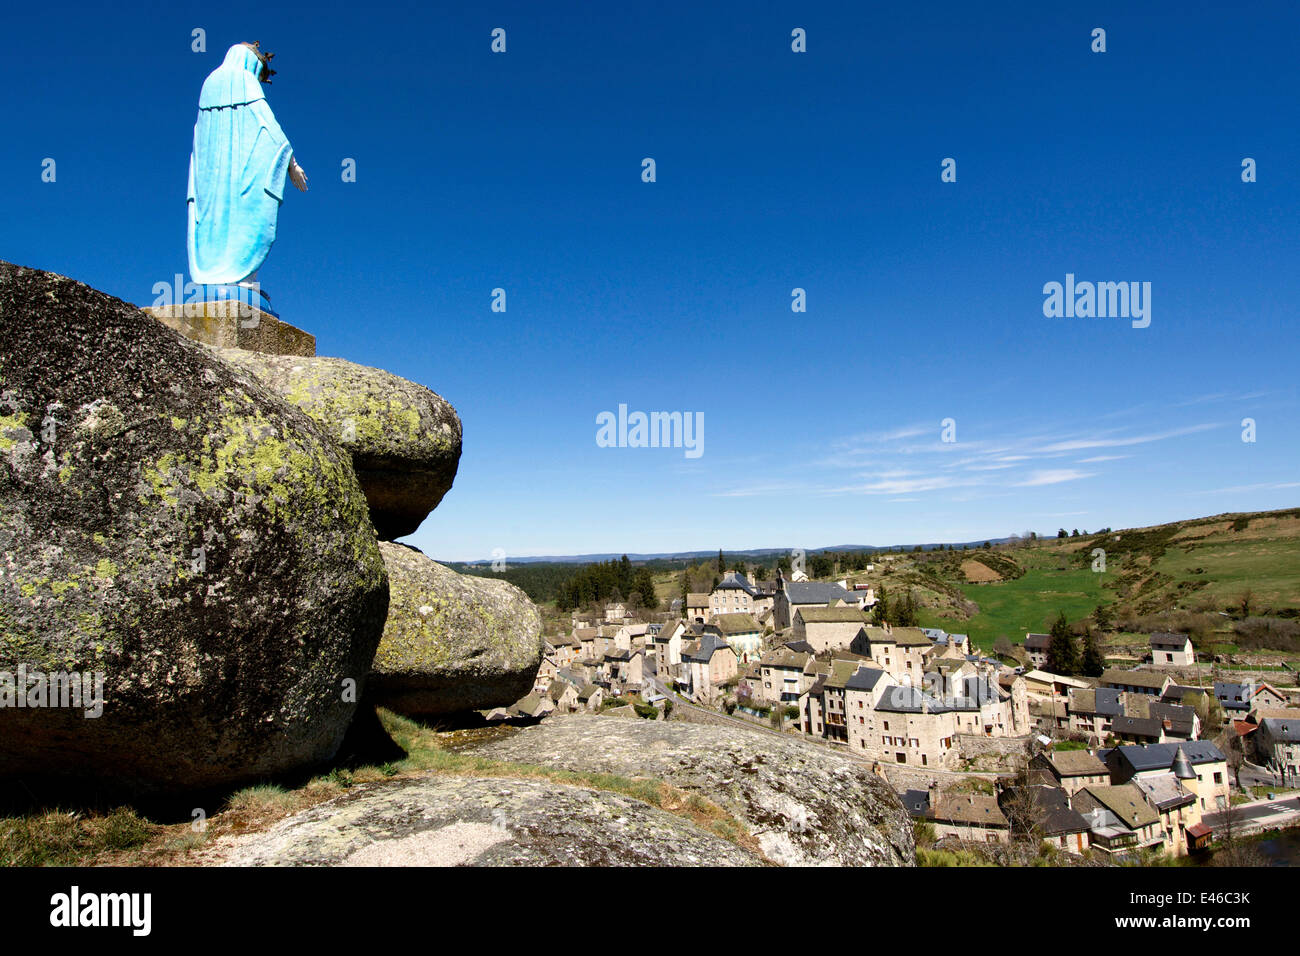 Village of Serverette, Truyere valley, Gevaudan, Margeride, Lozere, Languedoc-Roussillon, France, Europe - with Virgin Mary Stock Photo